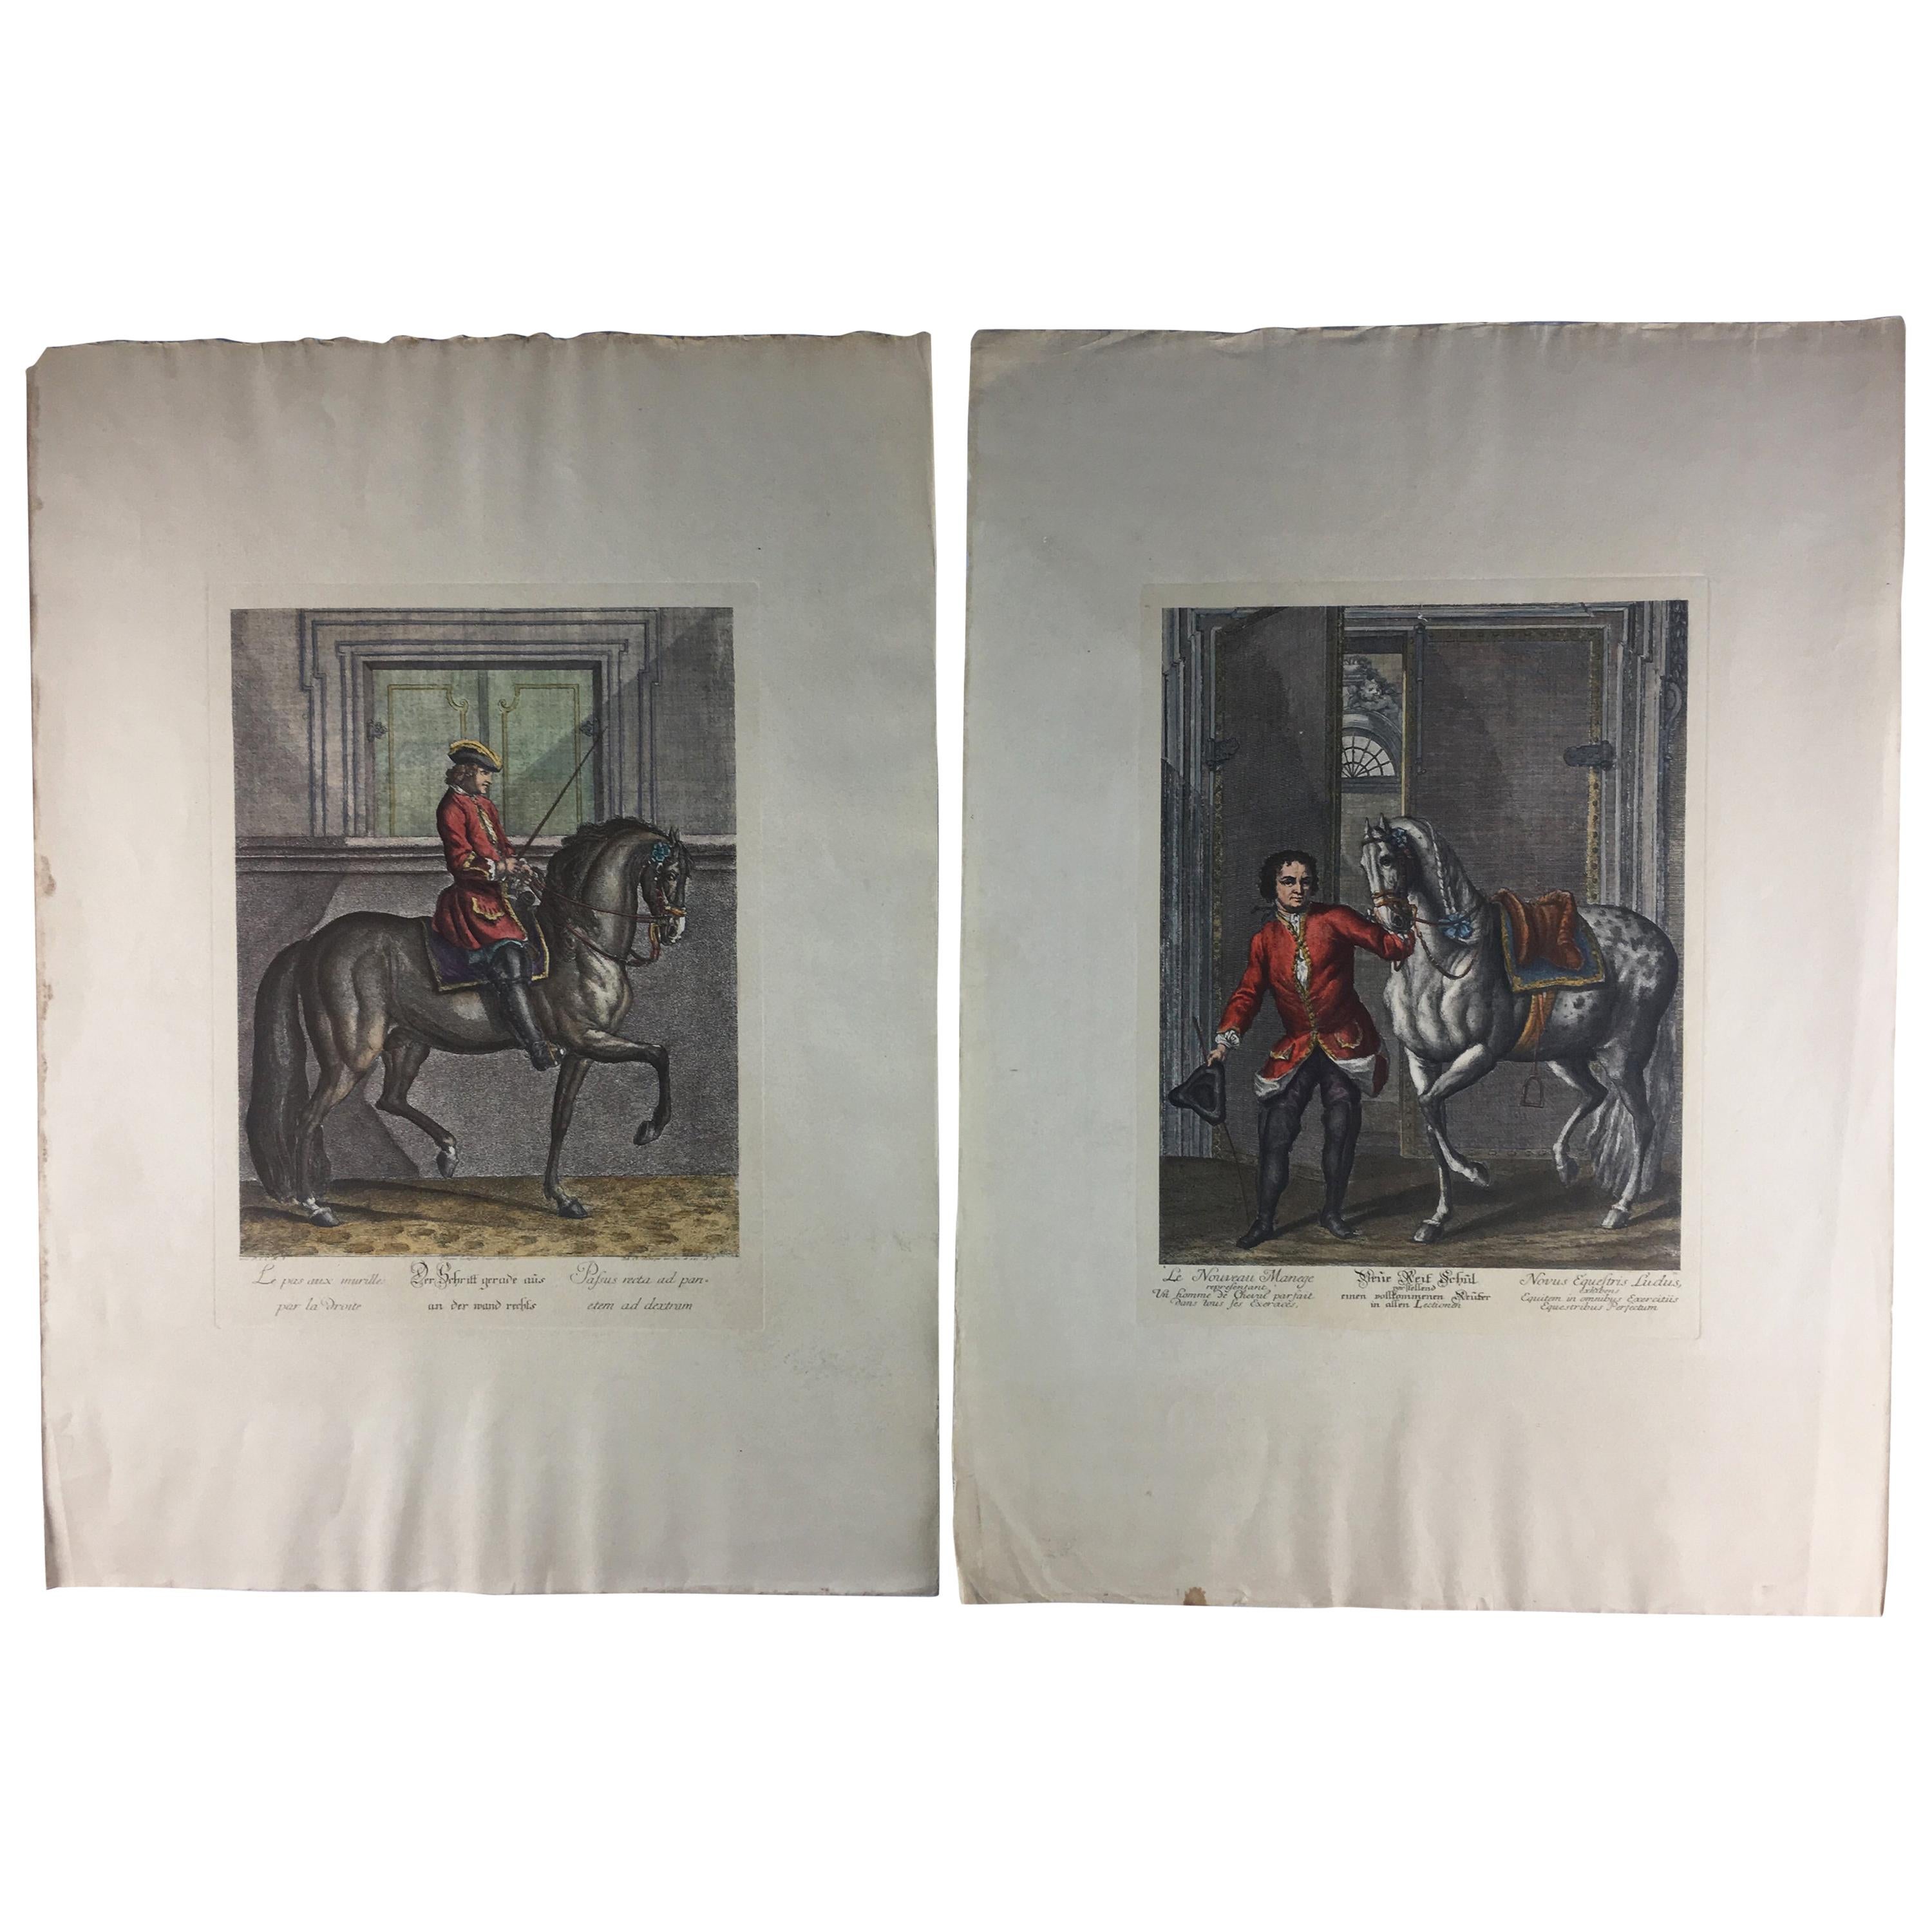 Pair of Engraving Prints of Horses and Riders in Dressage Poses